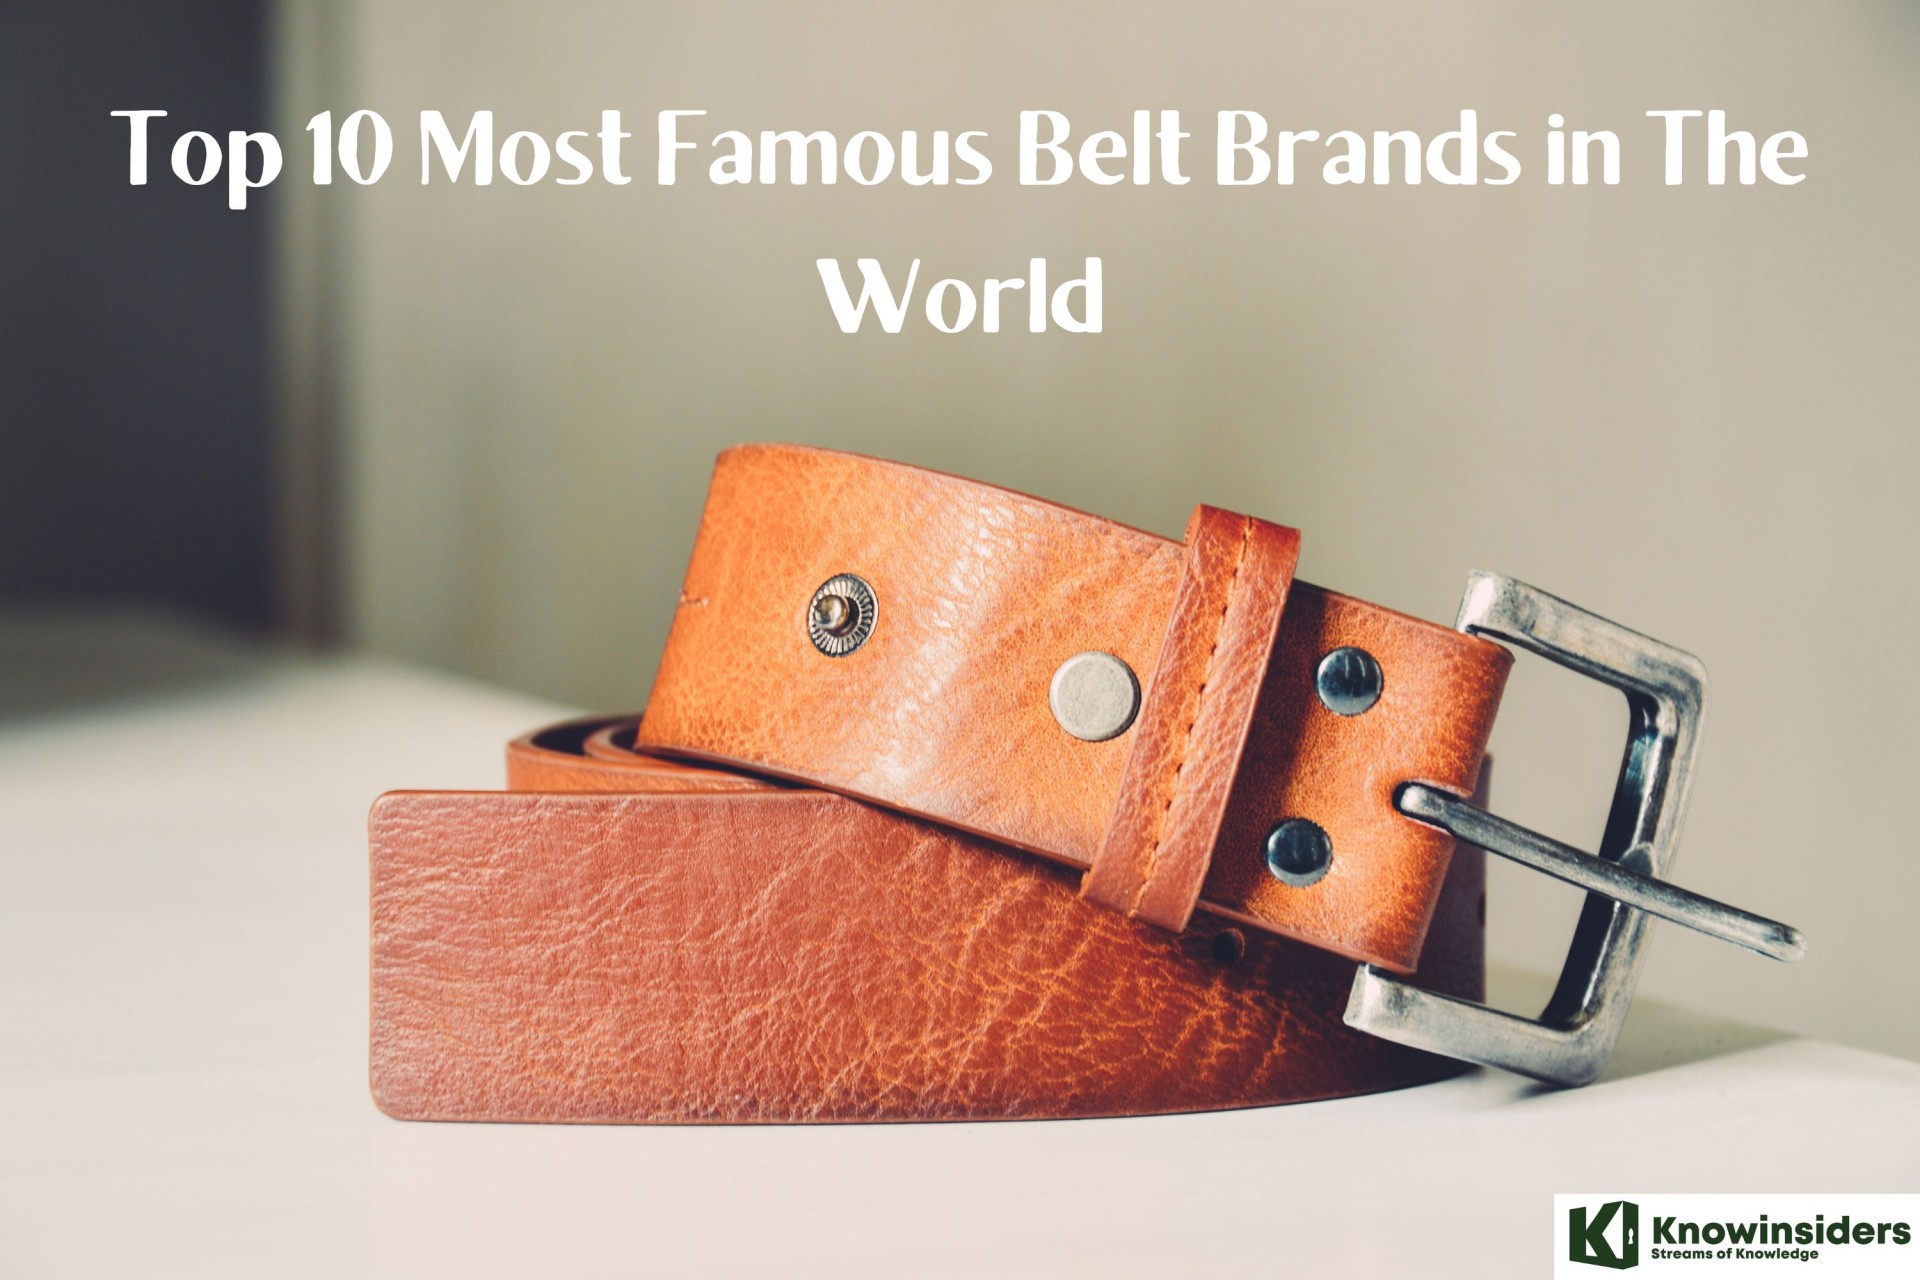 The top 10 most expensive belt brands in the world 2021 